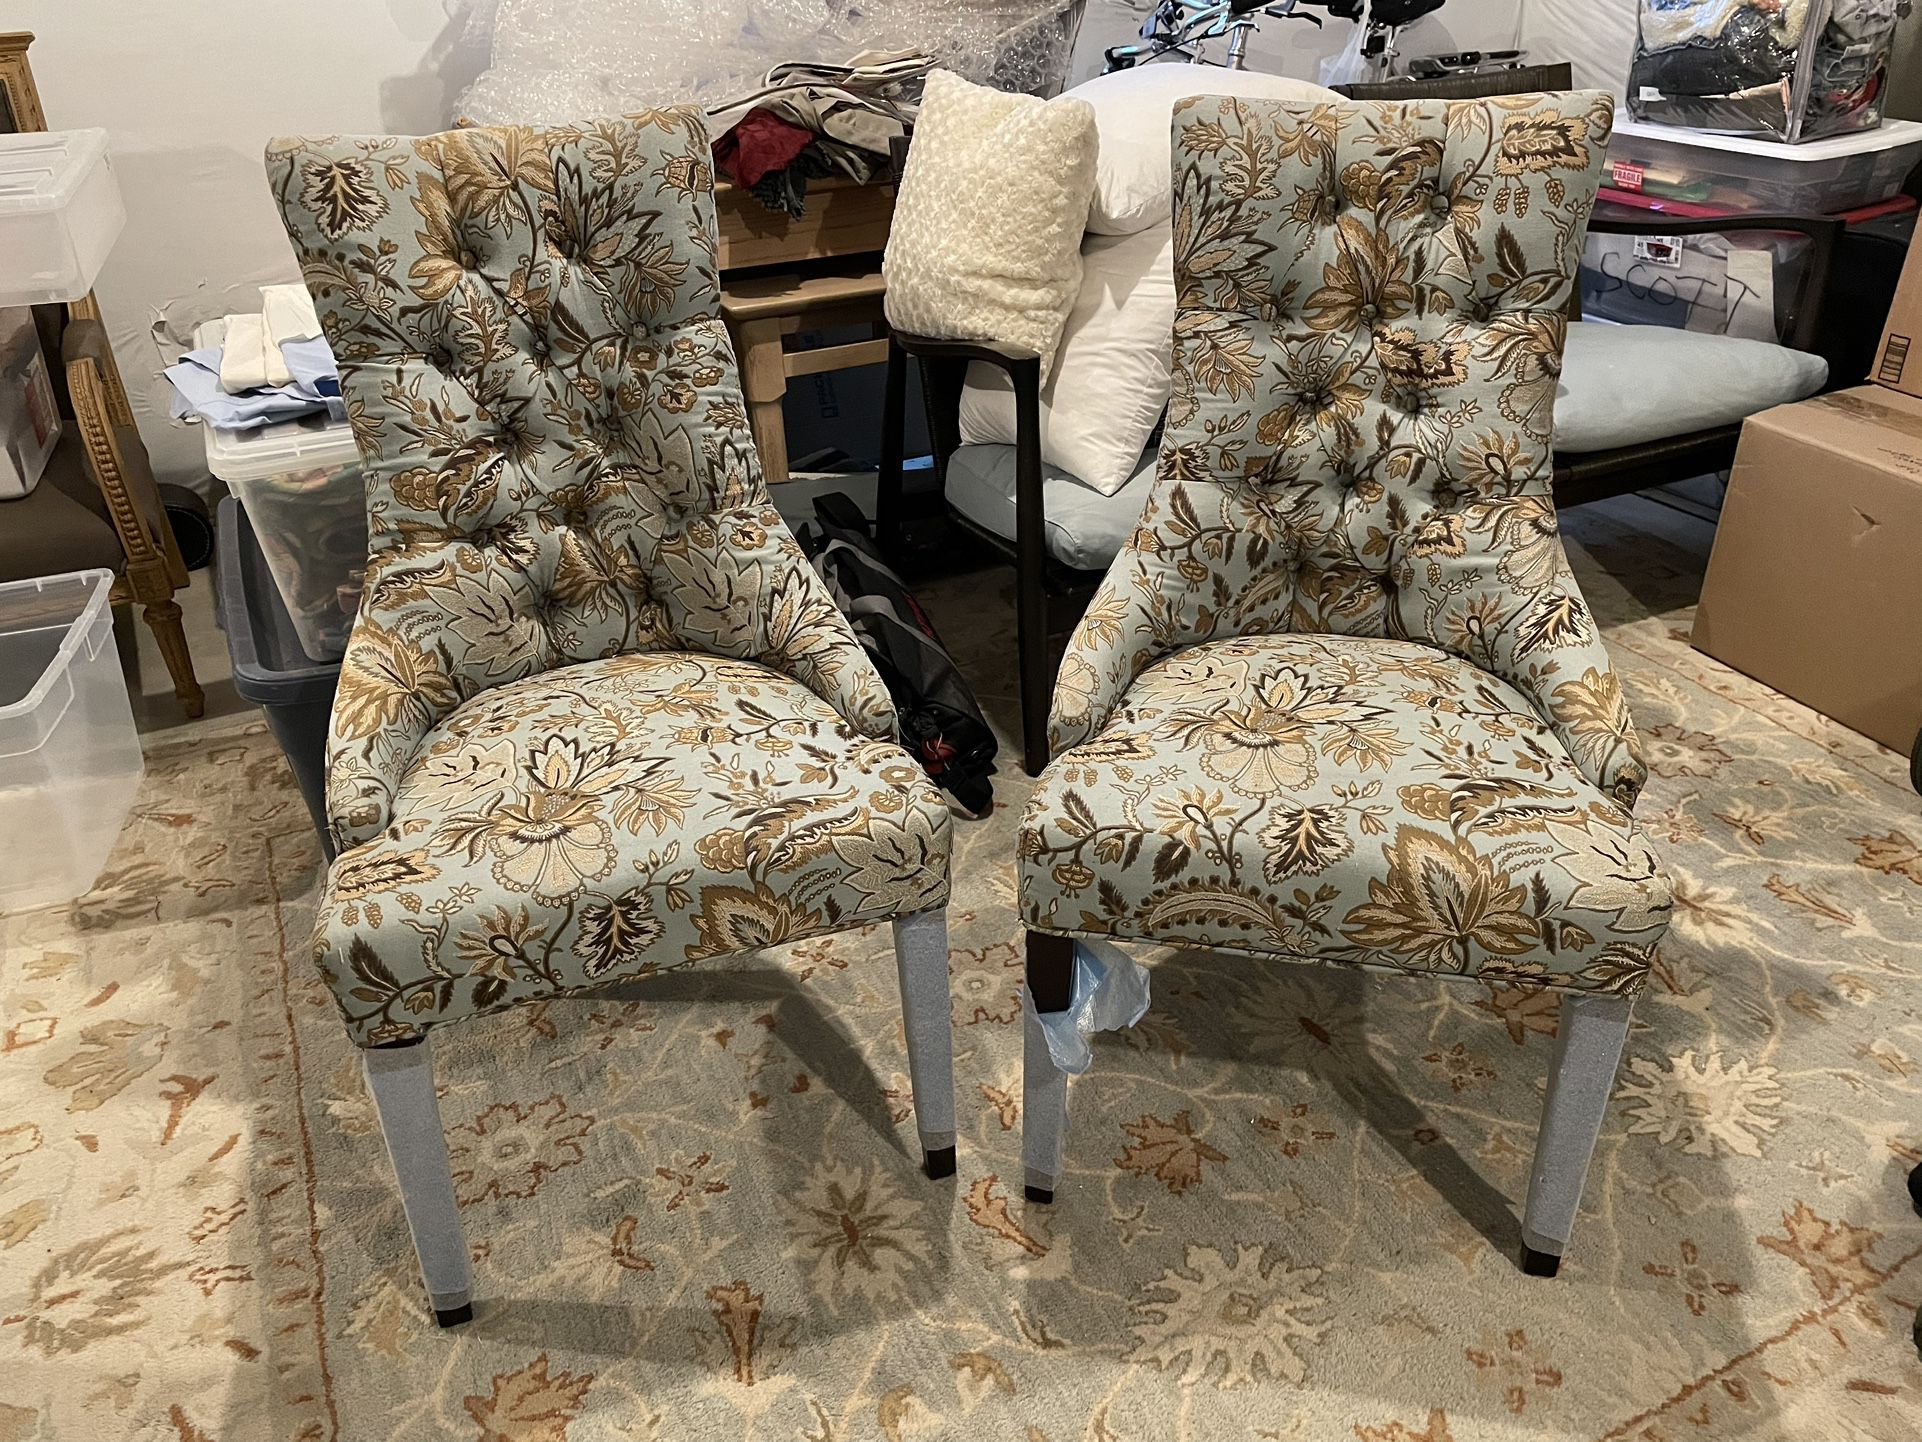 2 PIER ONE PATTERNED CHAIRS